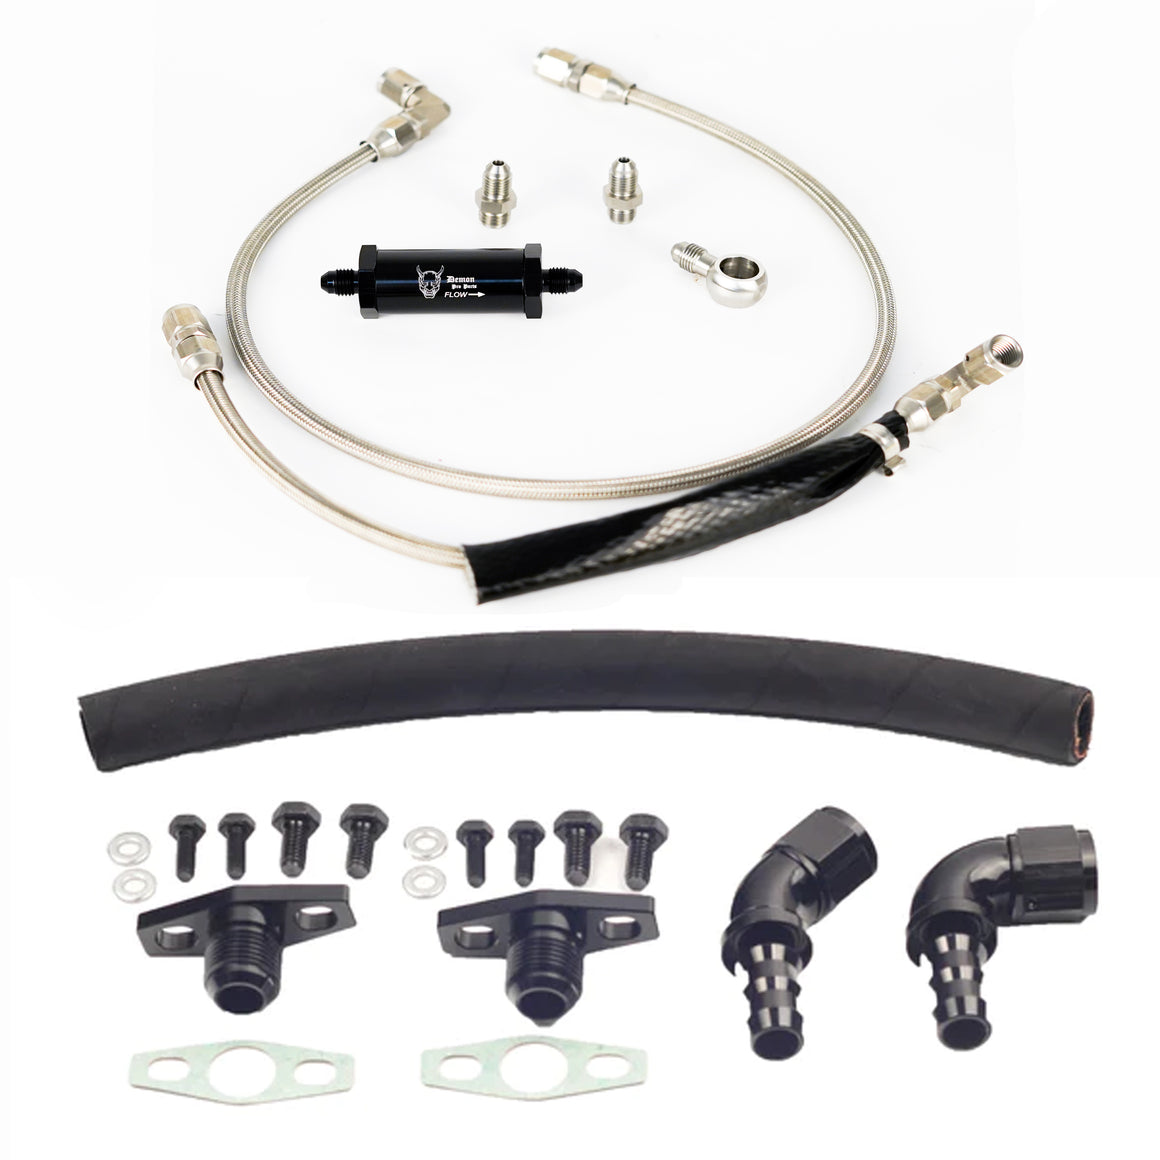 DPP Turbo Oil Drain Line & New Gen2 Oil Feed Line Kit Package For Ford Falcon XR6 BA/BF/FG FPV F6 with GT3582R/GT3576